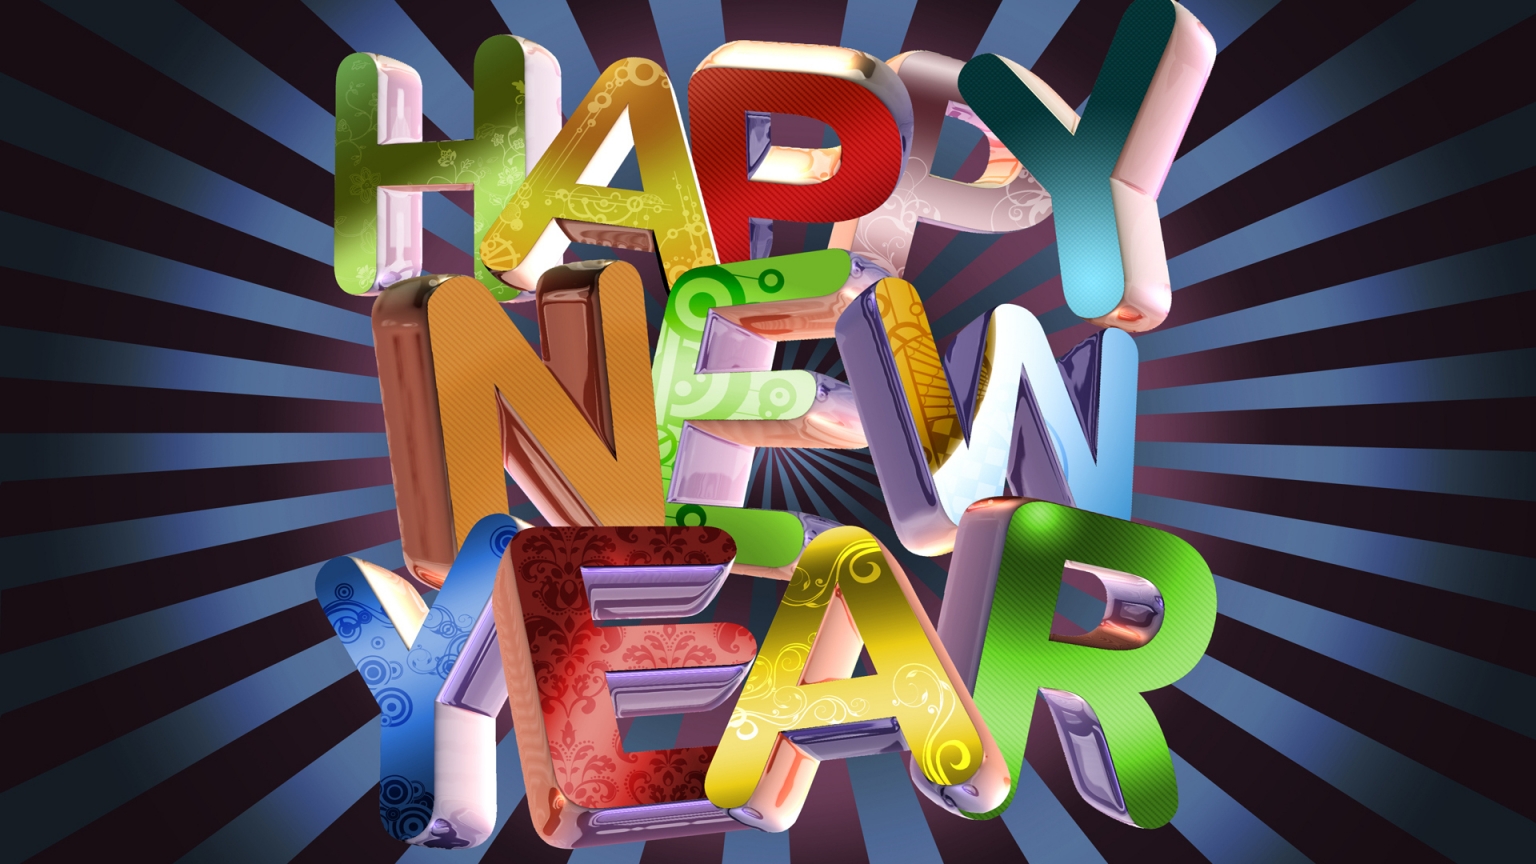 Happy New Year for 1536 x 864 HDTV resolution